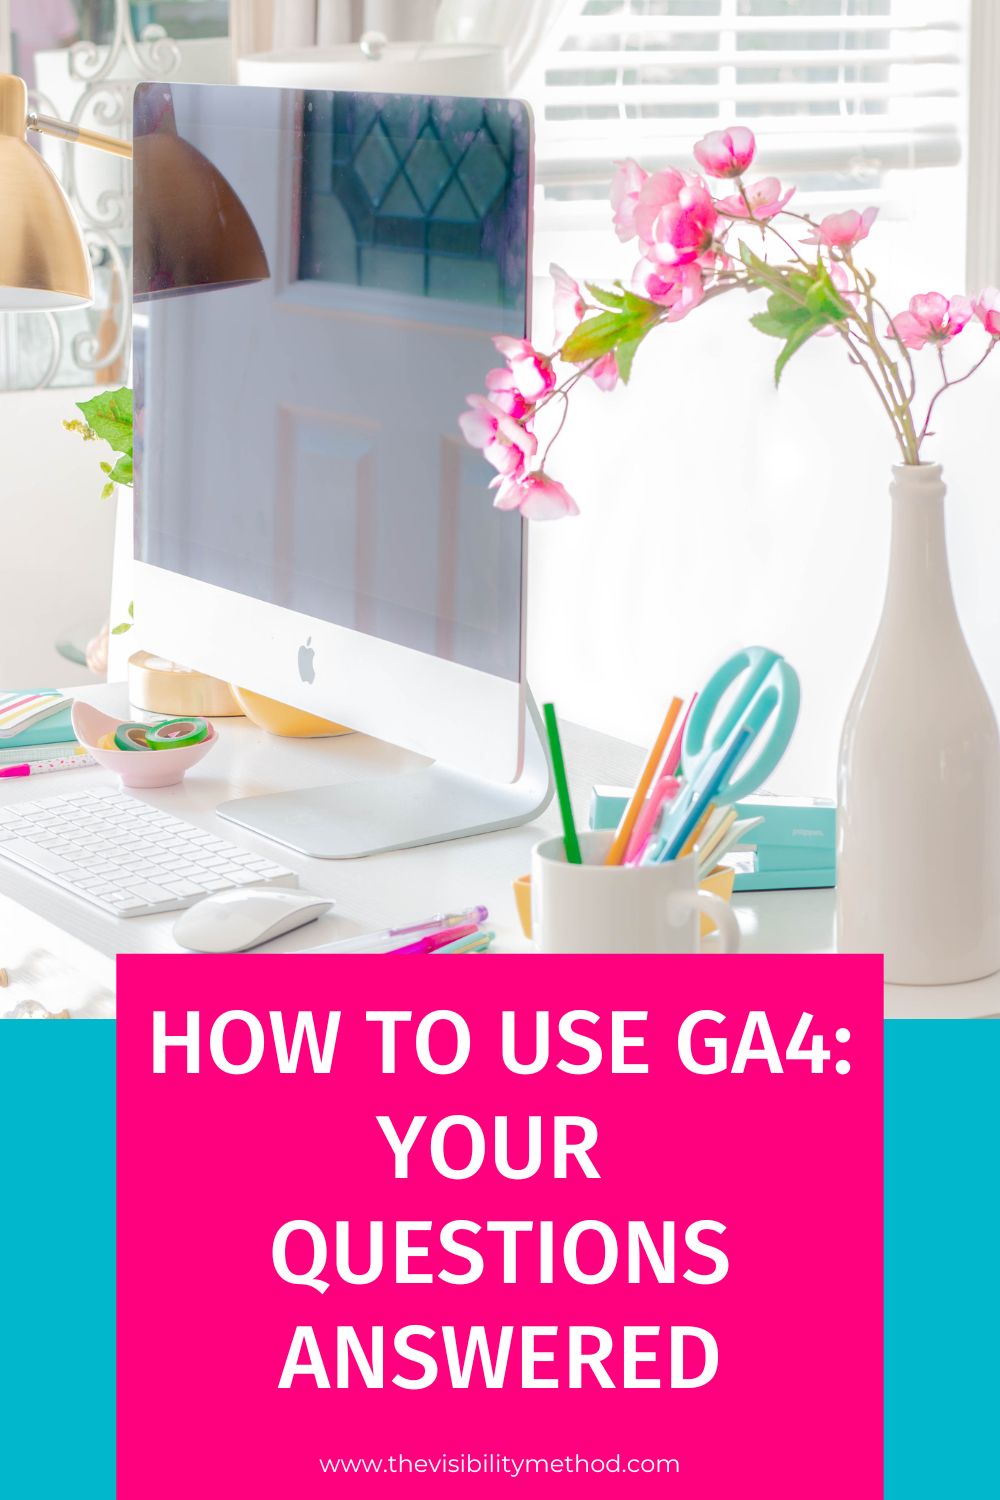 How To Use GA4 : Your Questions Answered